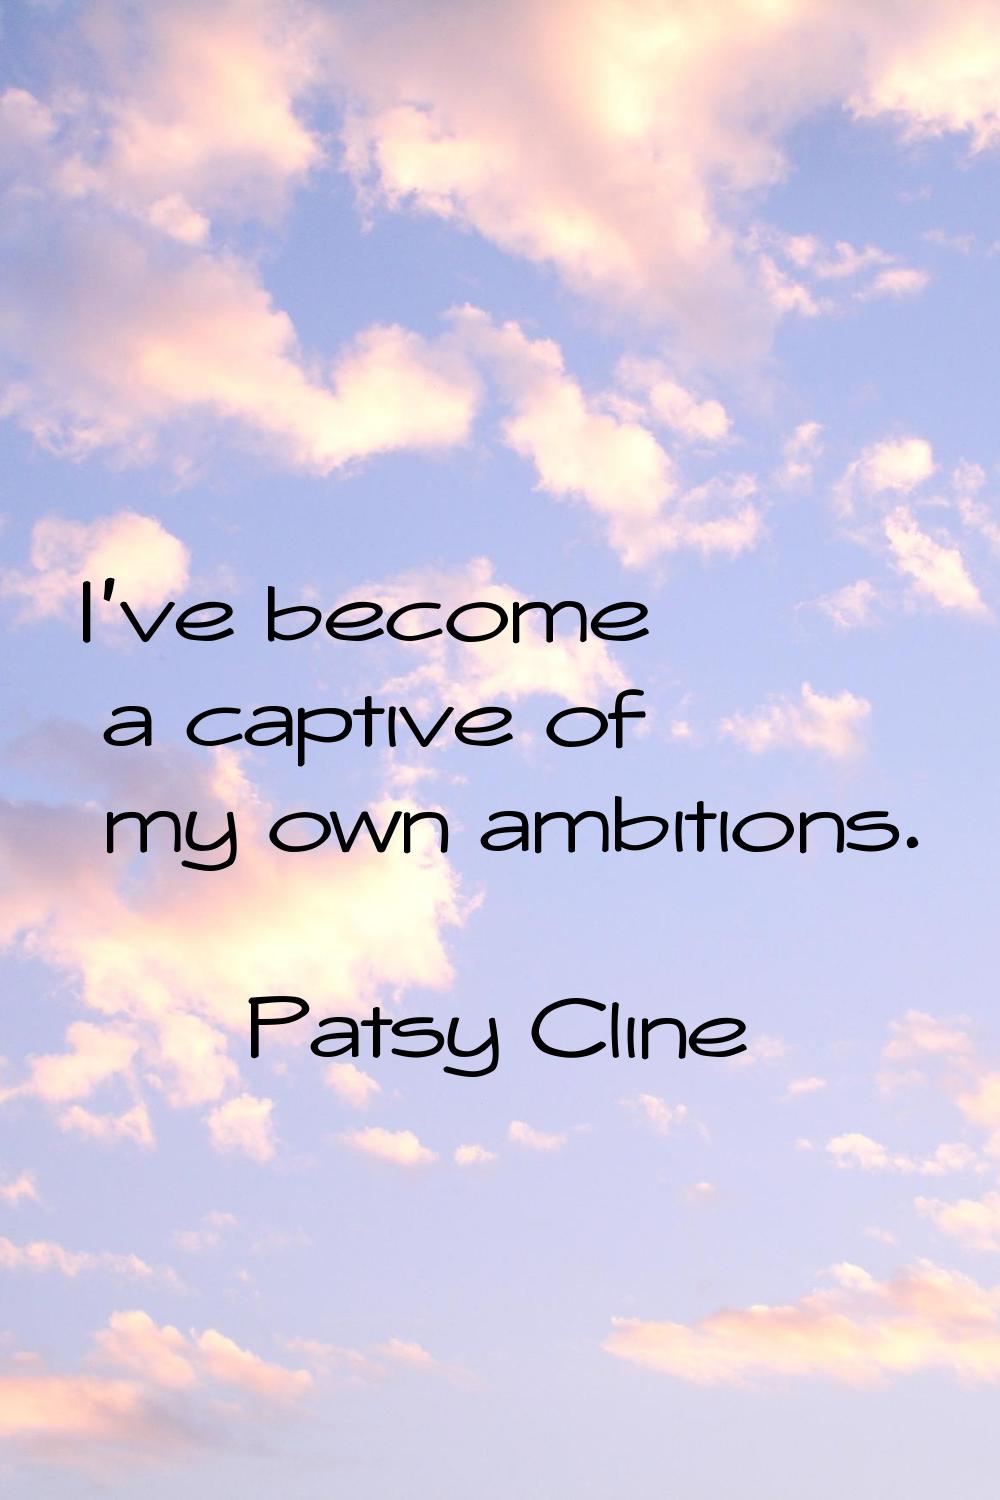 I've become a captive of my own ambitions.